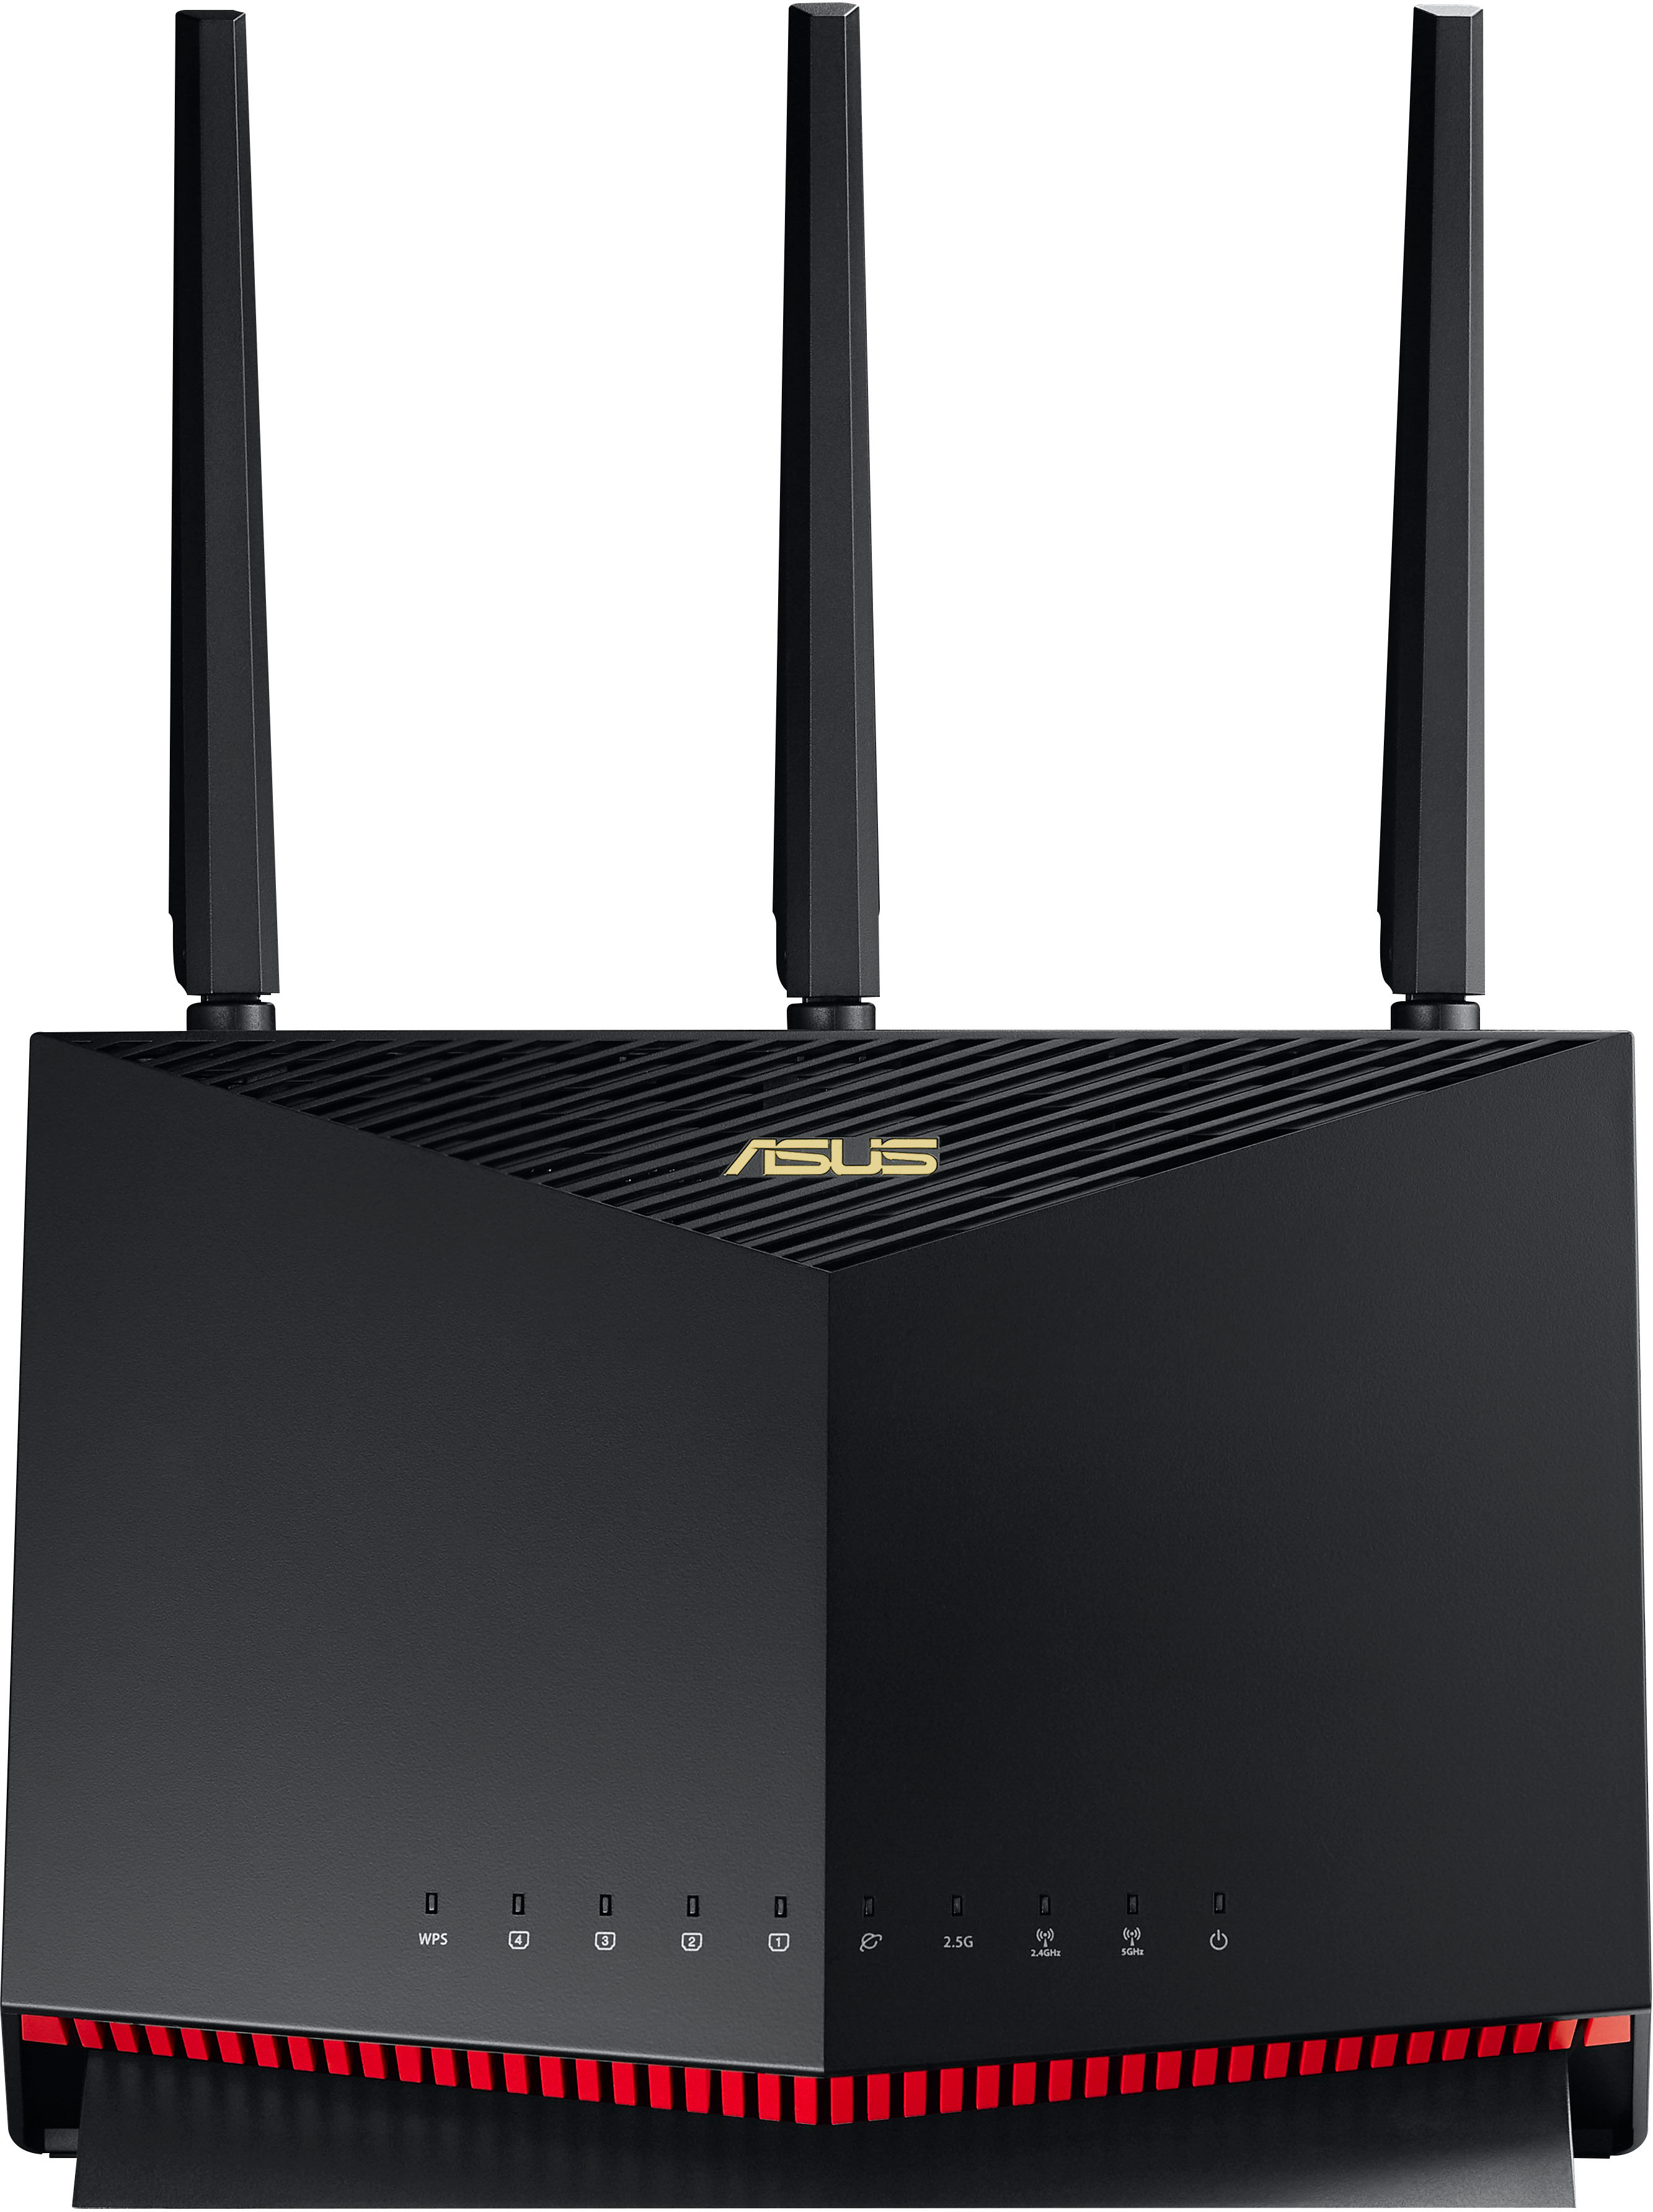 ASUS AX5700 Dual-Band Wi-Fi 6 Router Black RT-AX86U Pro - Best Buy